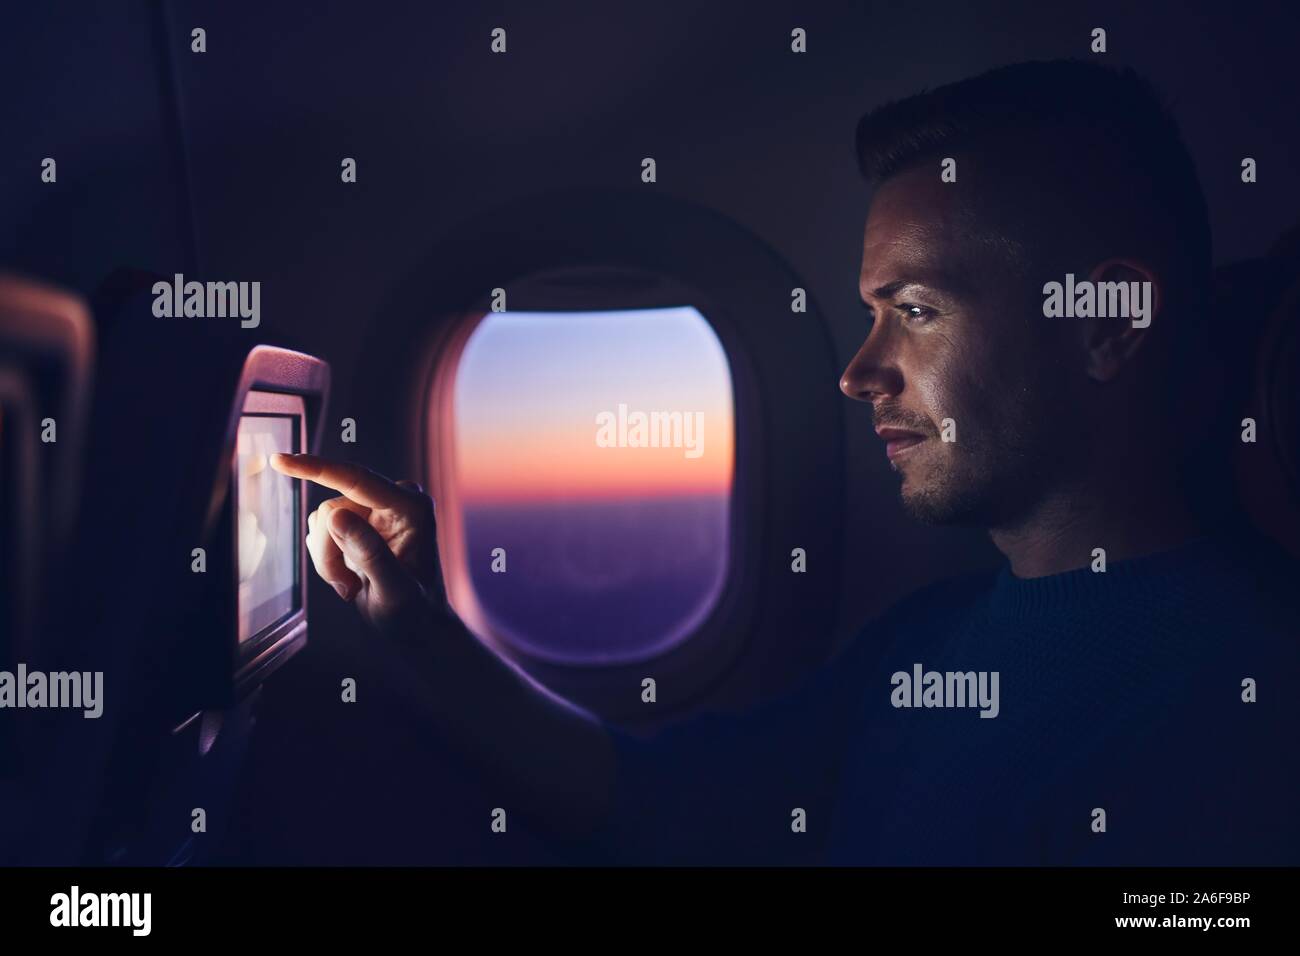 Man travel by airplane during night. Passenger using in-flight entertainment system and internet connection. Stock Photo